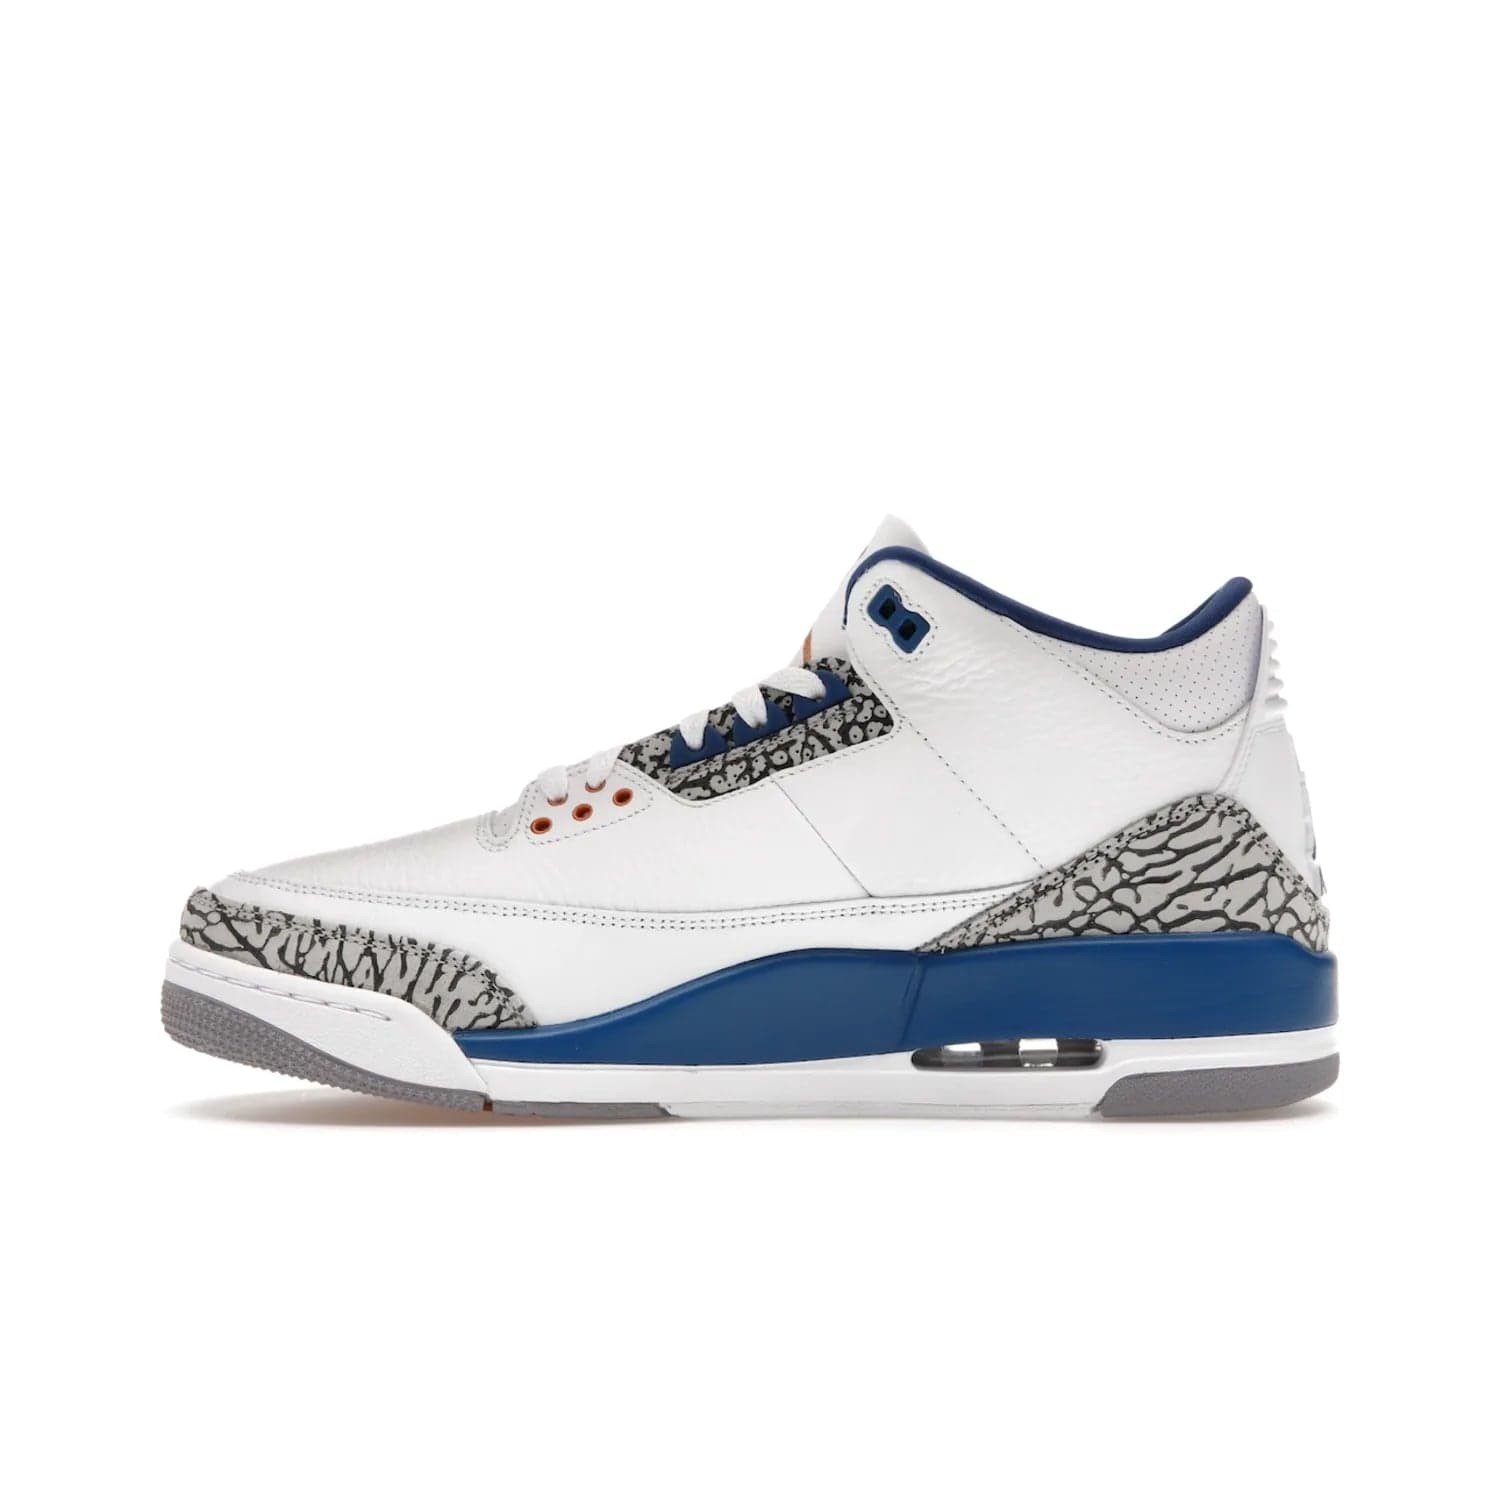 Jordan 3 Retro Wizards - Image 19 - Only at www.BallersClubKickz.com - ##
Special tribute sneaker from Jordan Brand to Michael Jordan's time with the Washington Wizards. Iconic white upper, orange Jumpman logo, blue accents, metallic copper details, and cement grey outsole. Buy the Air Jordan 3 Retro Wizards April 29, 2023.